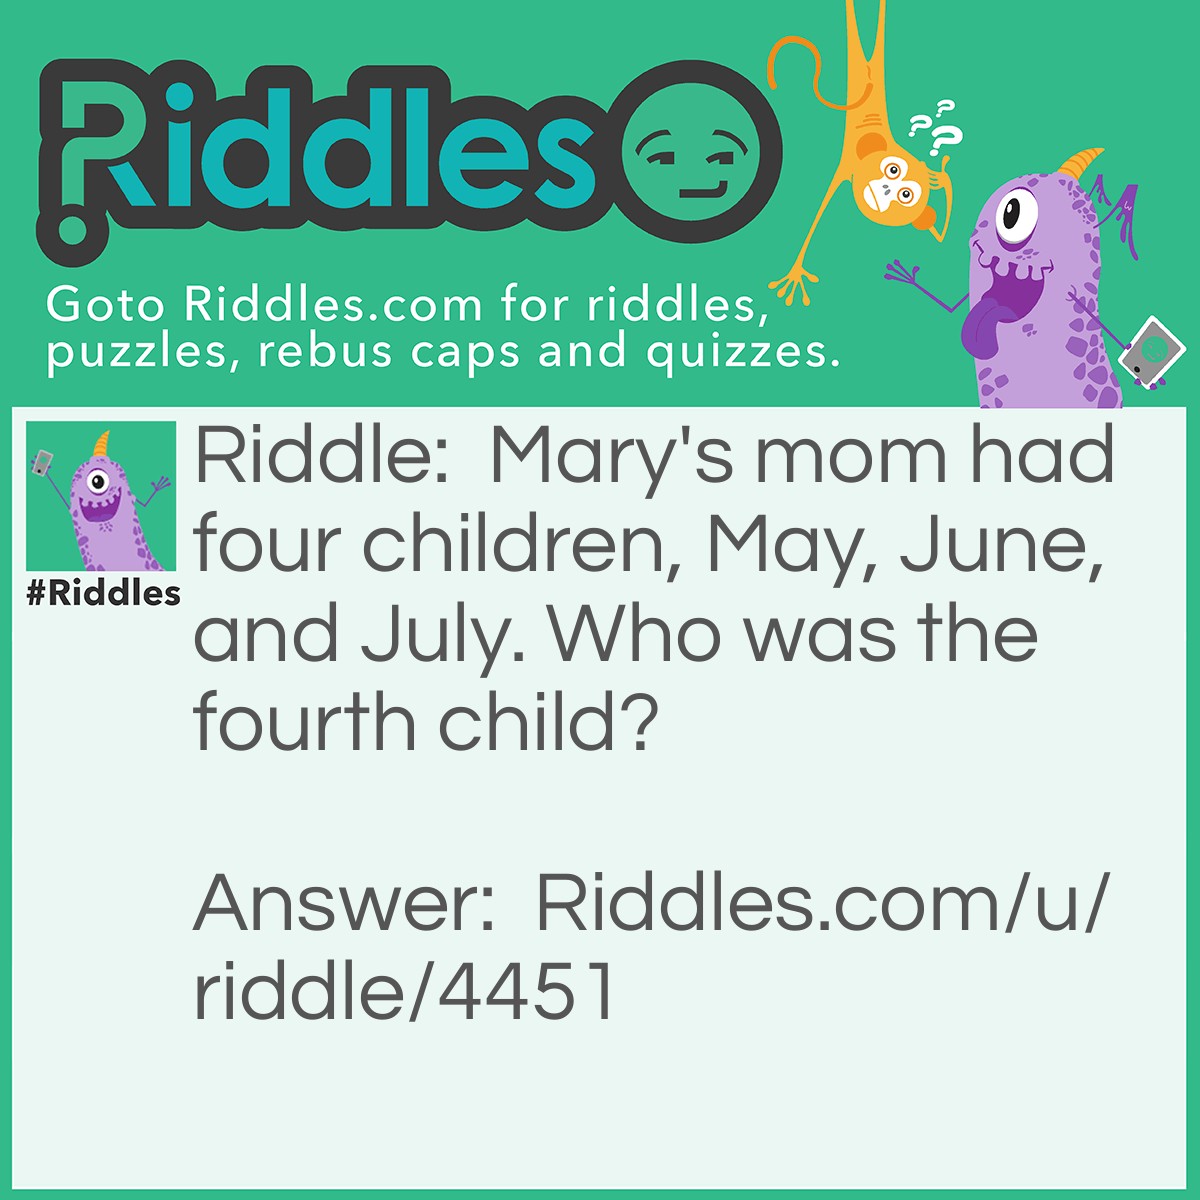 Riddle: Mary's mom had four children, May, June, and July. Who was the fourth child? Answer: Mary! It's MARY'S mom. >:)